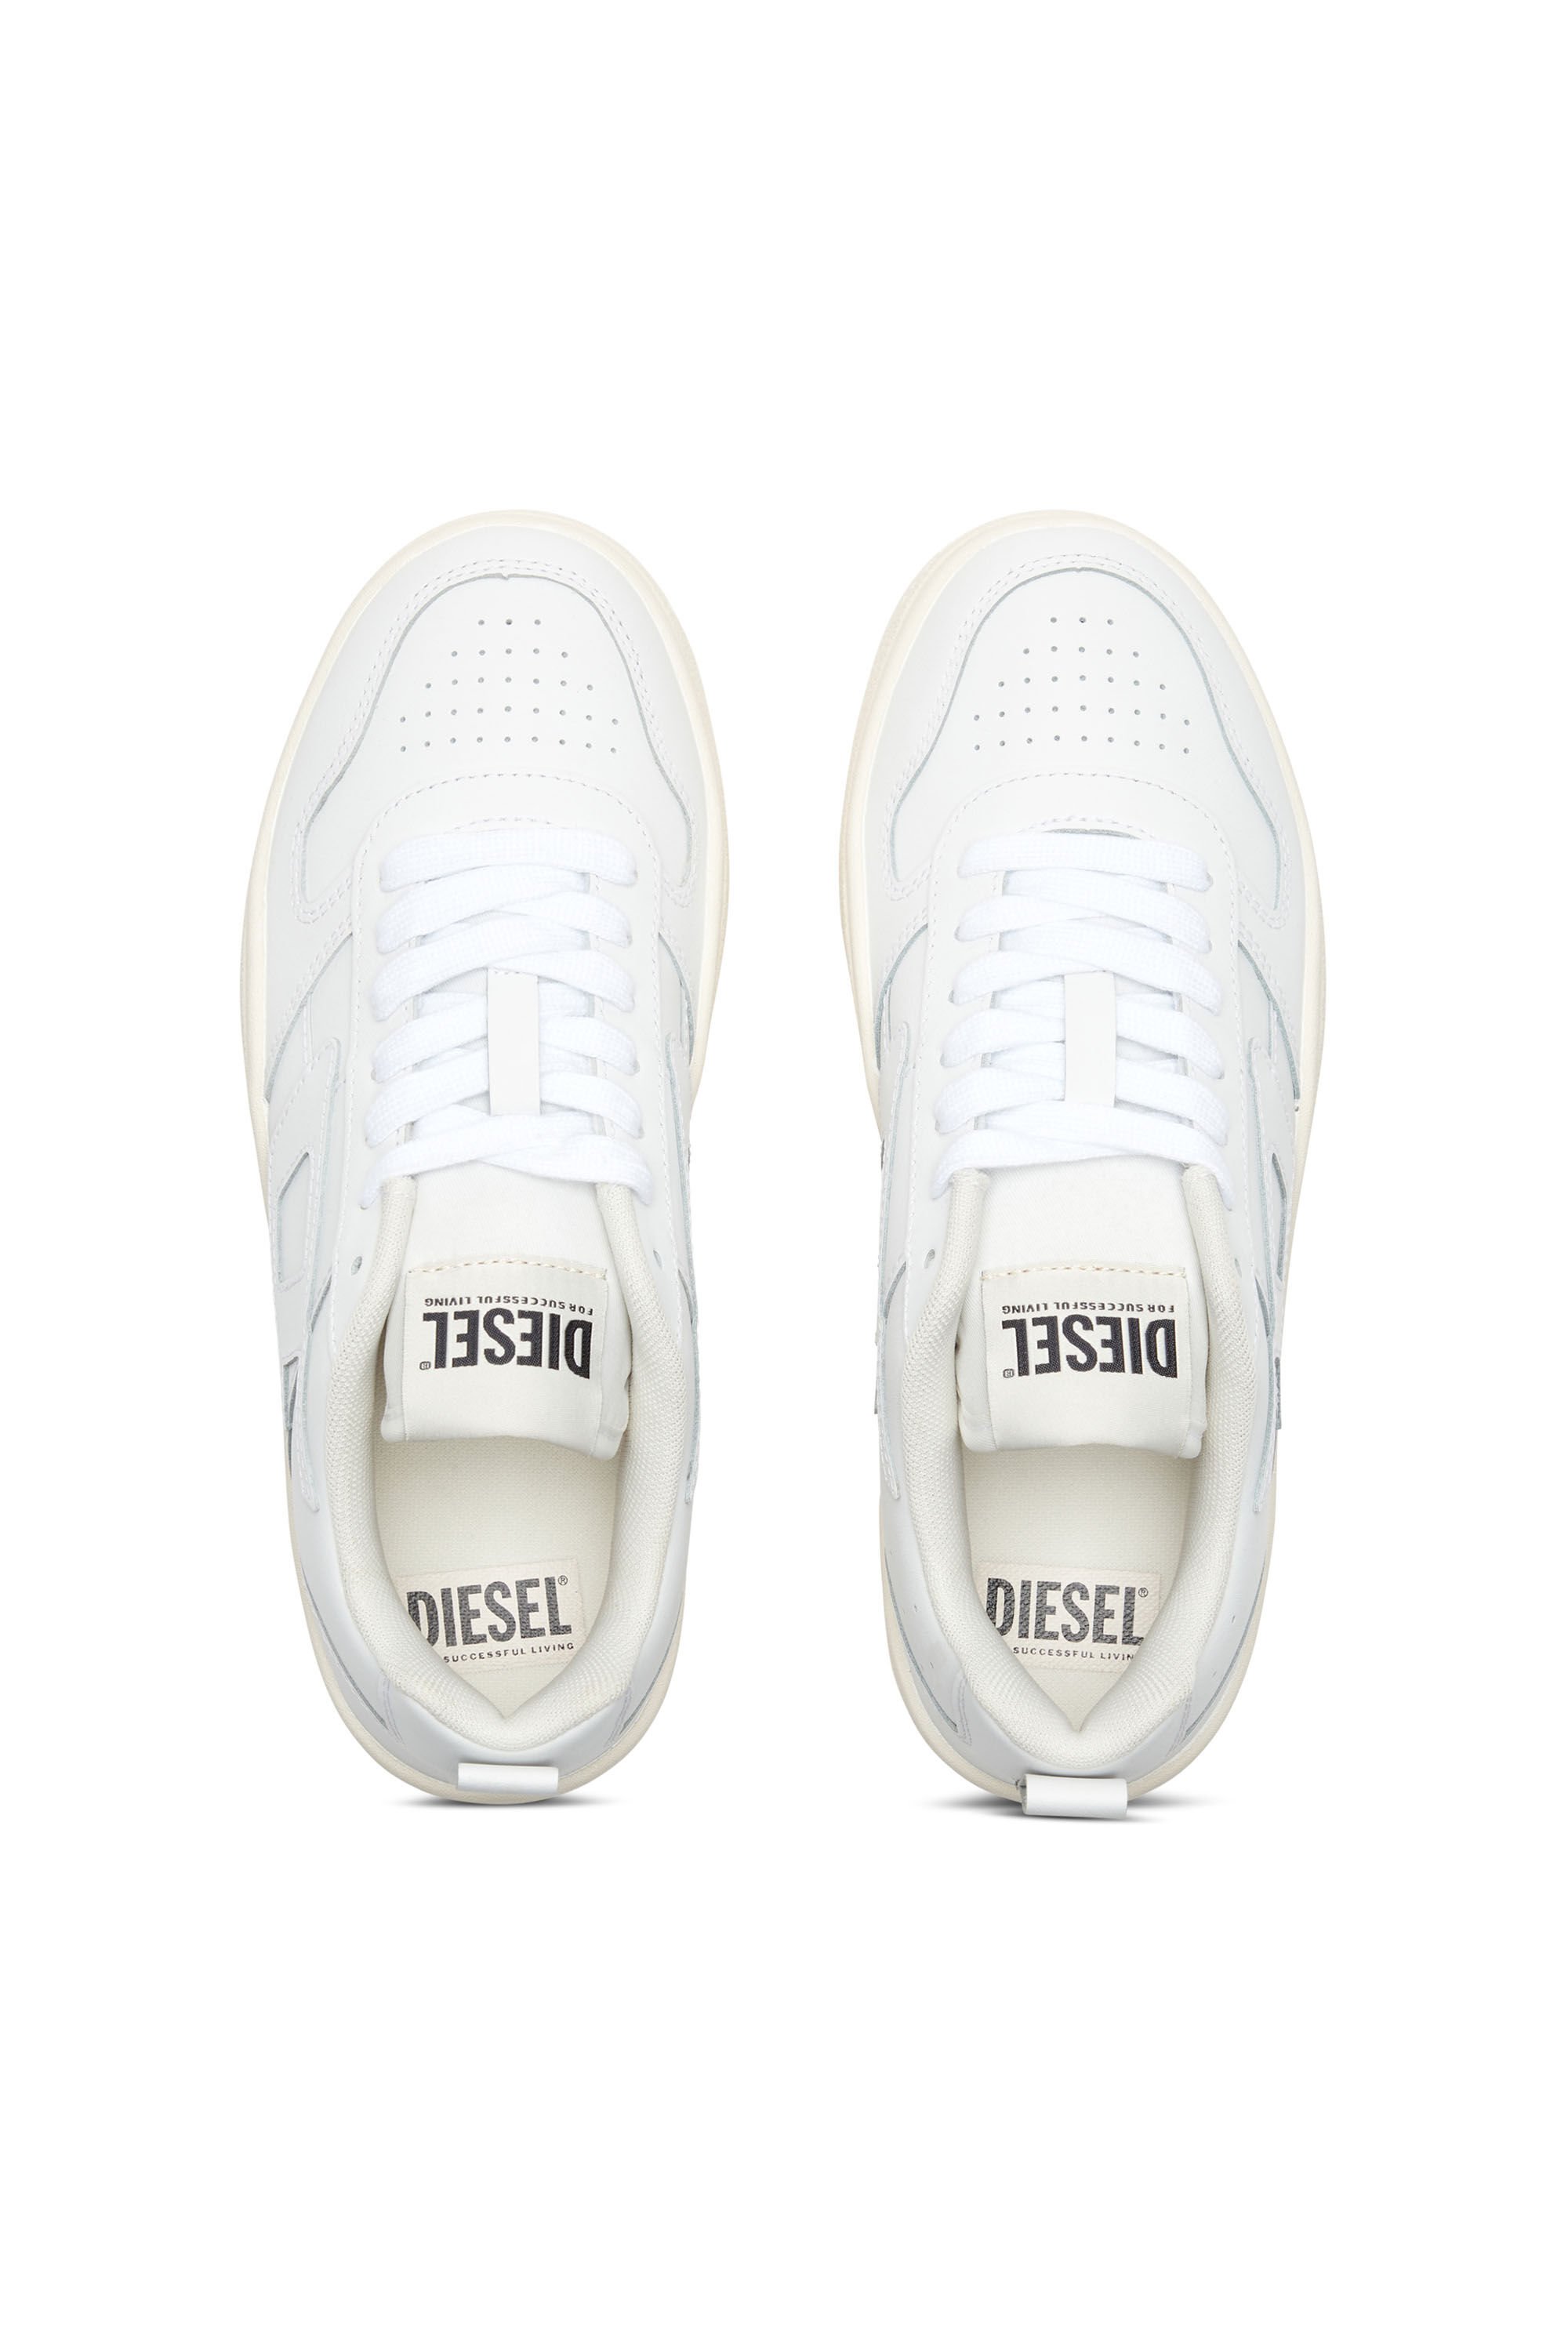 Diesel - S-UKIYO V2 LOW, Man S-Ukiyo Low-Low-top sneakers in leather and nylon in White - Image 4